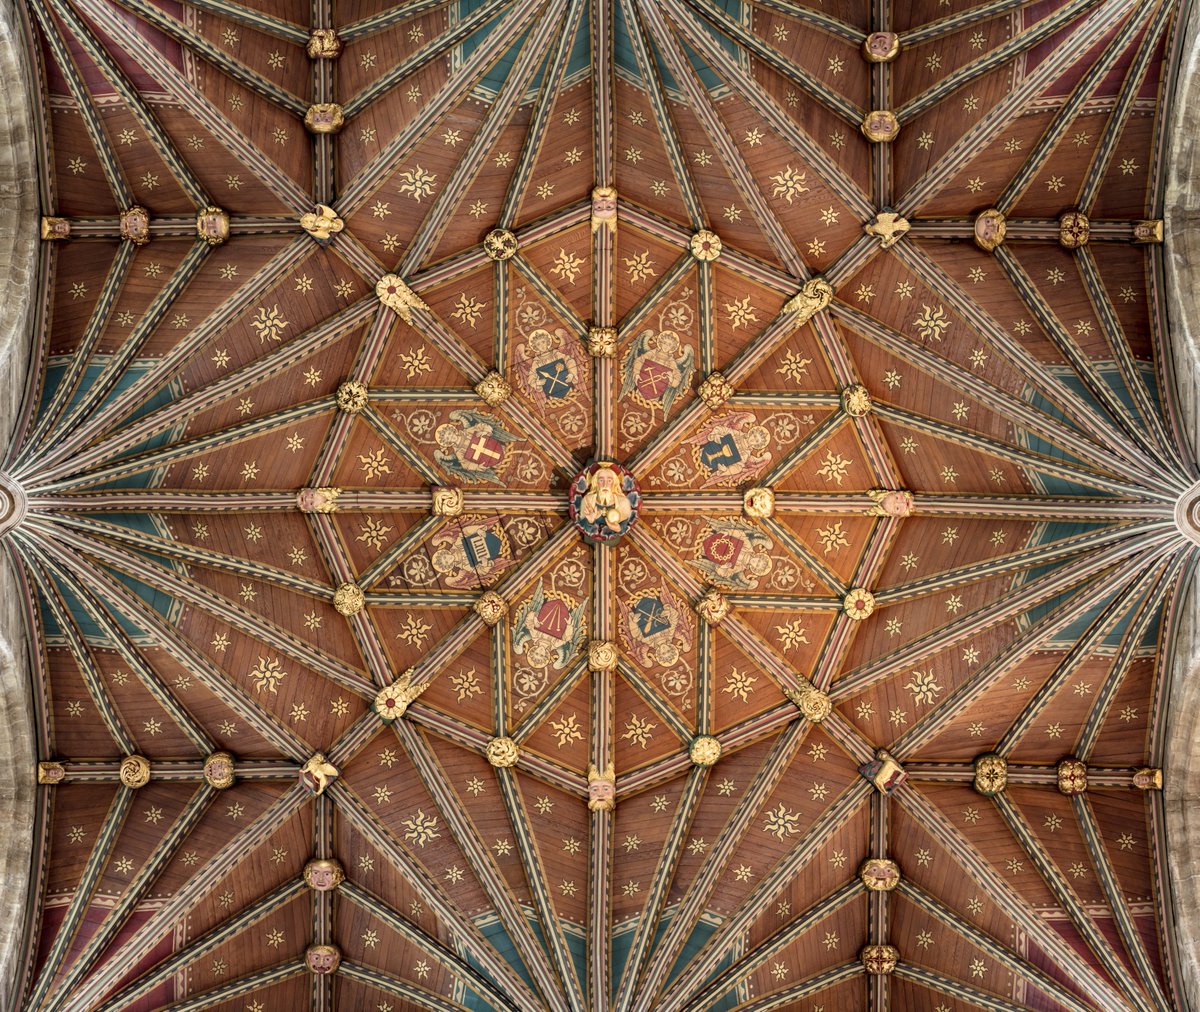 A starry ceiling for #StarWarsDay 🌟 May the fourth be with you 💫 📍 @pborocathedral, Peterborough, Cambridgeshire 📸 (c) Michael D Beckwith #StarWars #MayTheFourth #NationalChurchesTrust